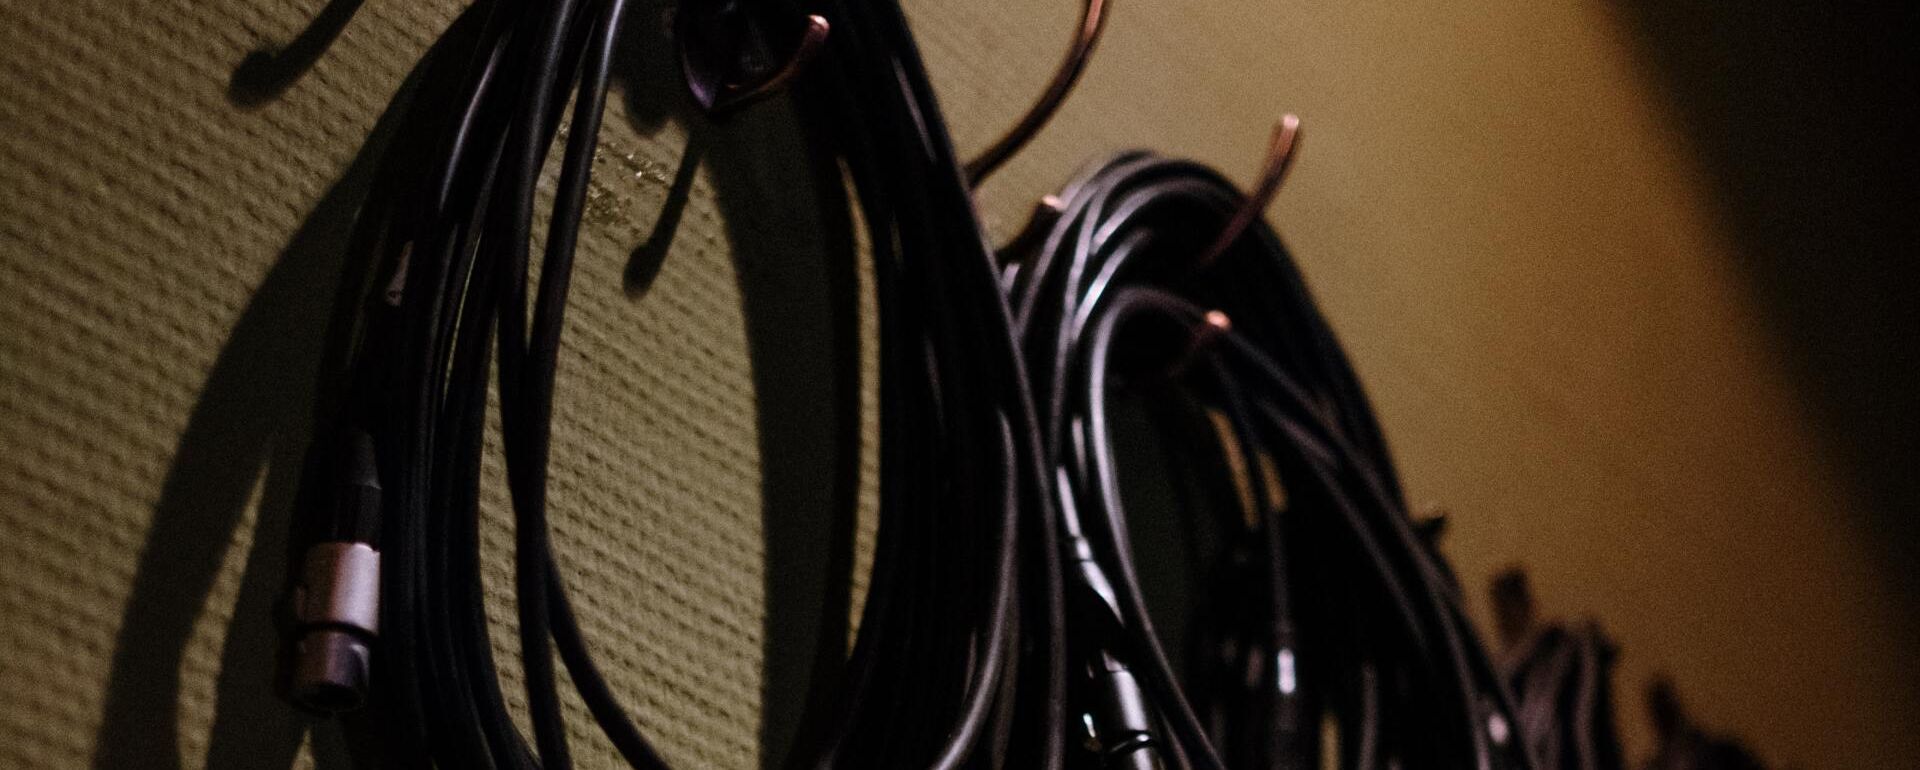 black cables hanging on hooks on a wall